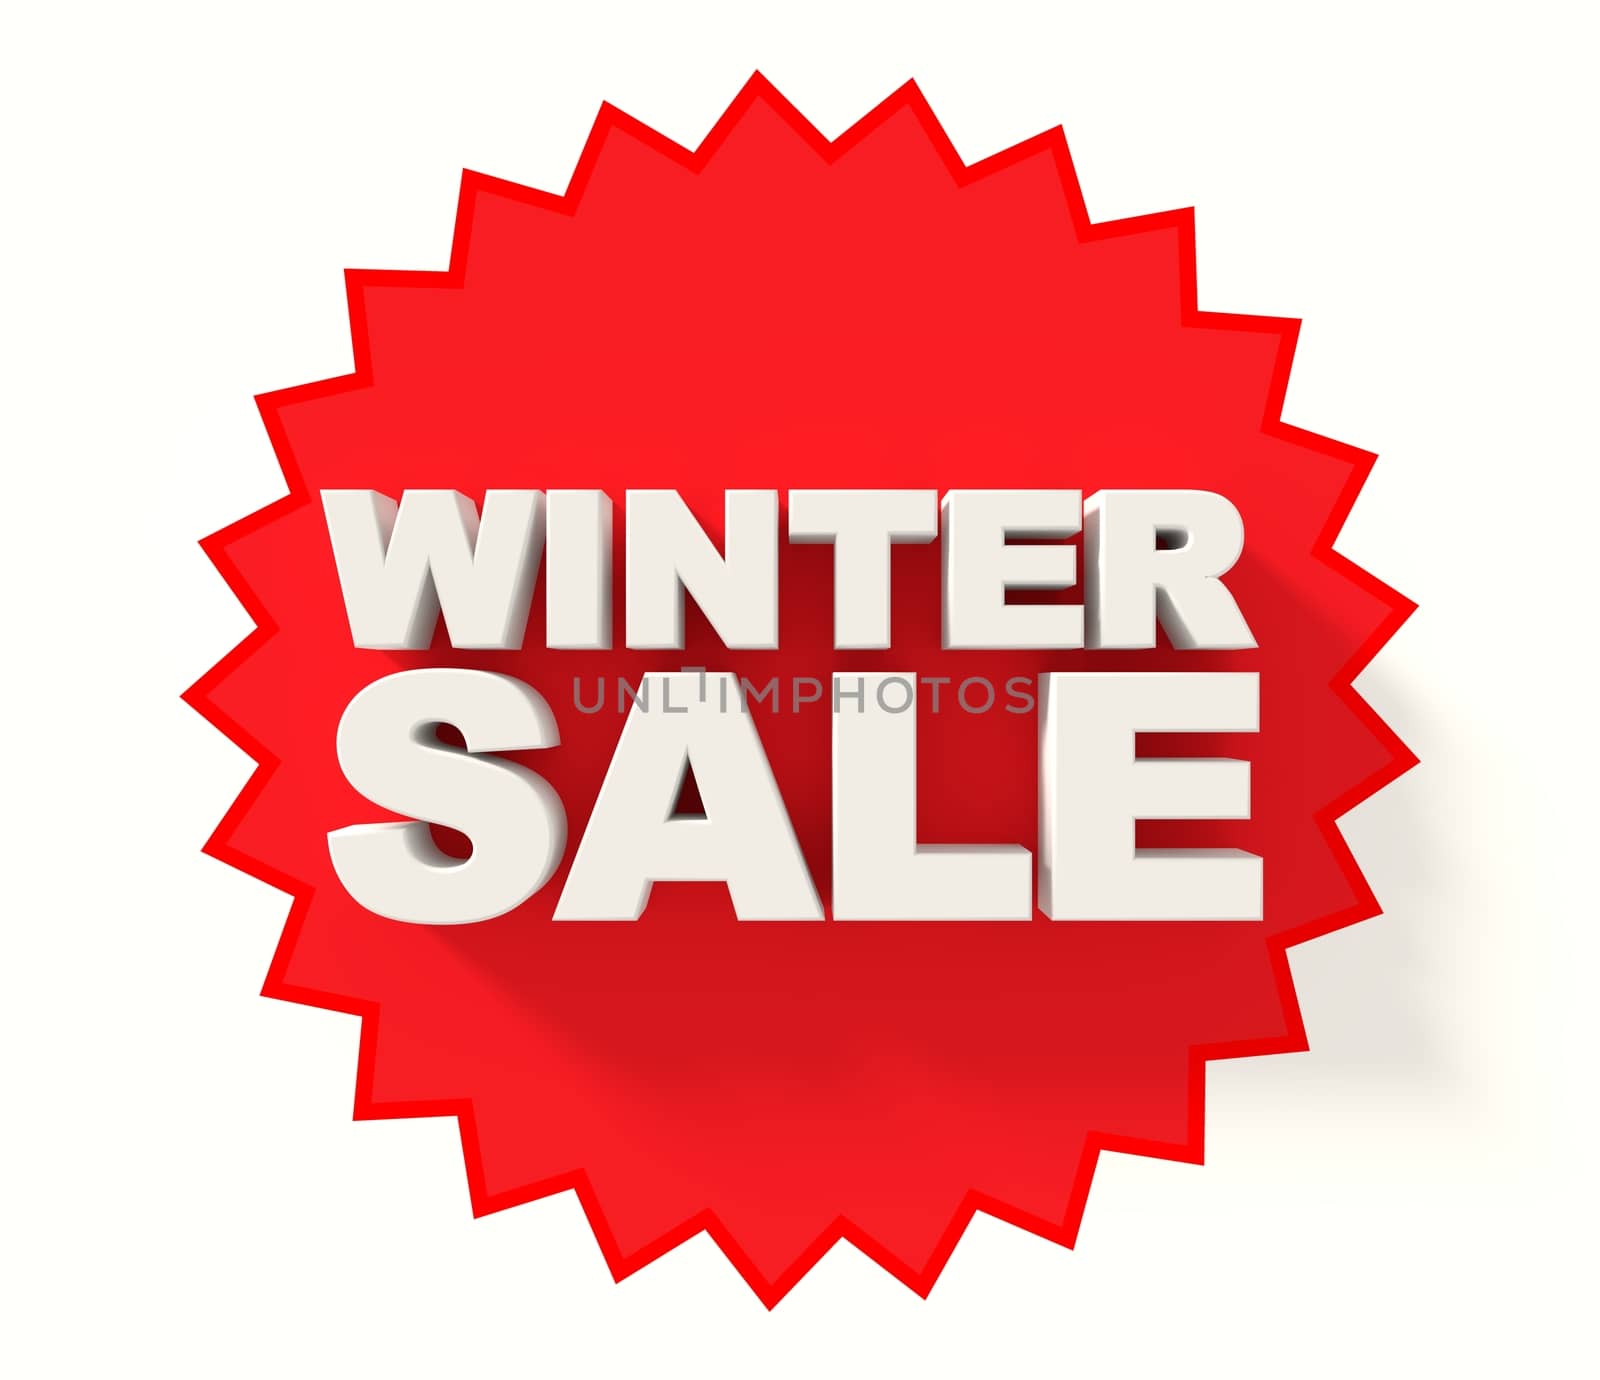 Winter sale sign, white letters on red star background